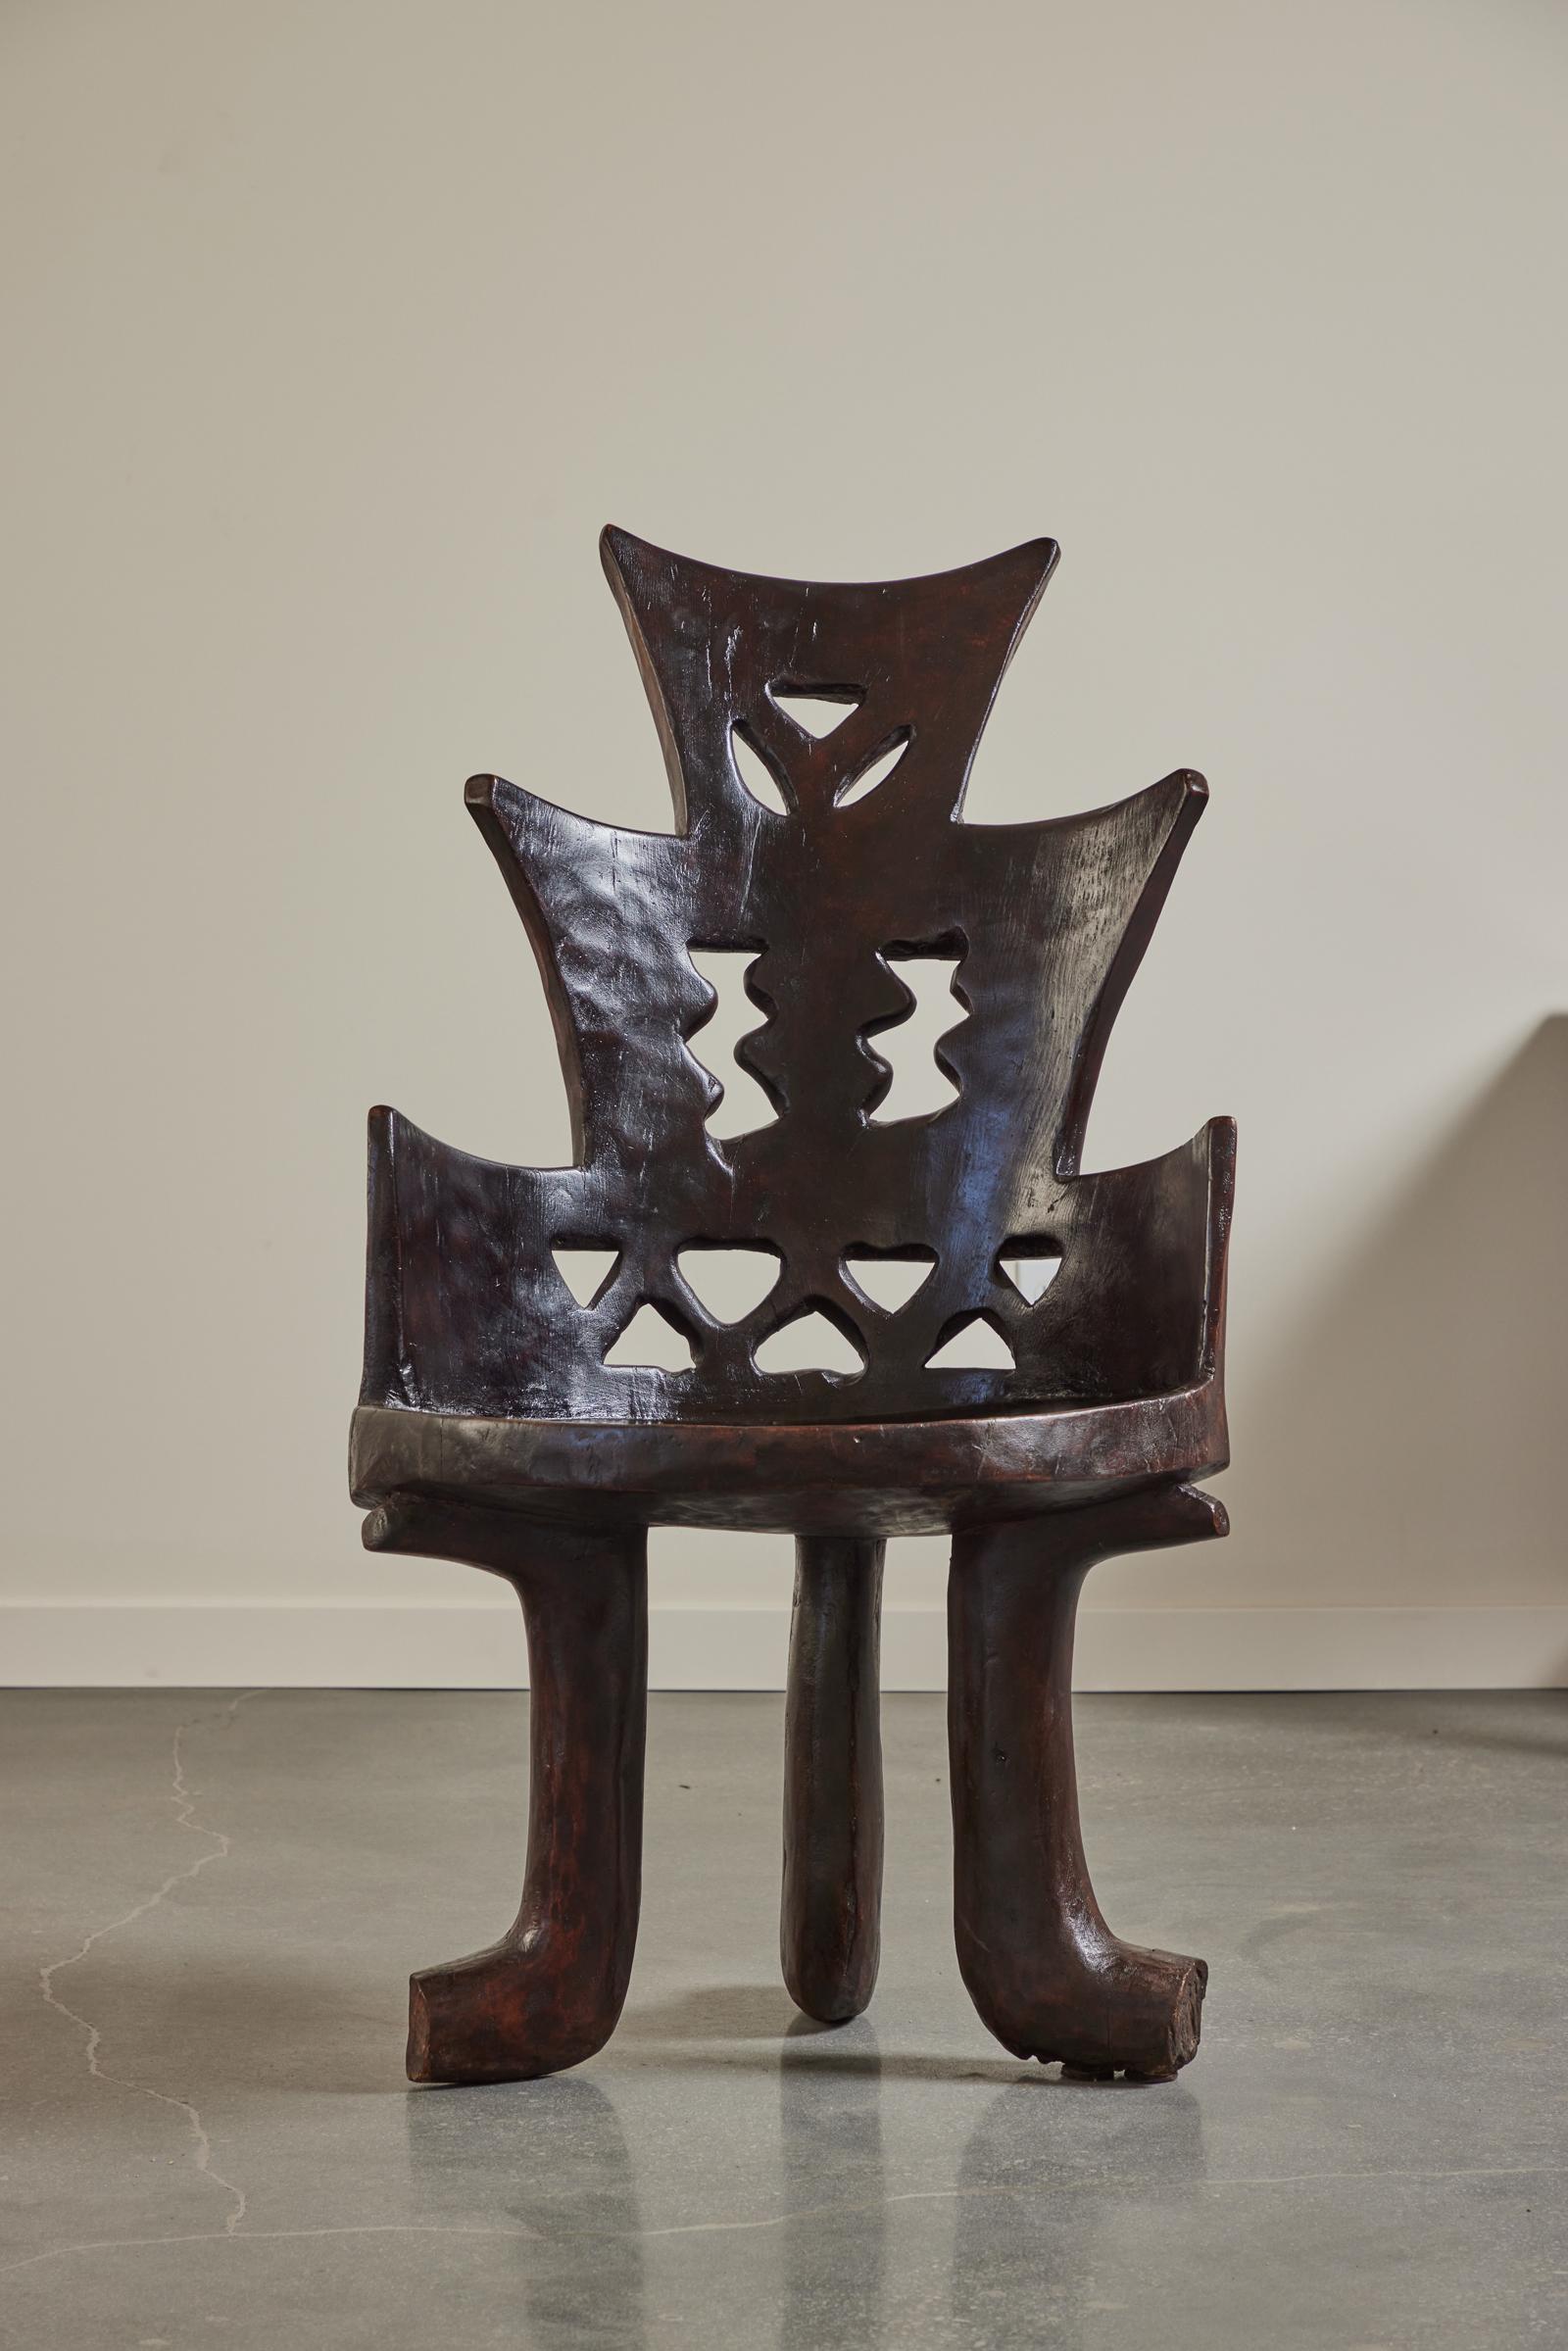 High backed carved chair From the Guarage people of Jimma, Oromia, South West Ethiopia. Mid to early 20th century. 

Of a single block of indigenous Wanza timber. The distinctive design of the geometric open work pattern in the back rises from the